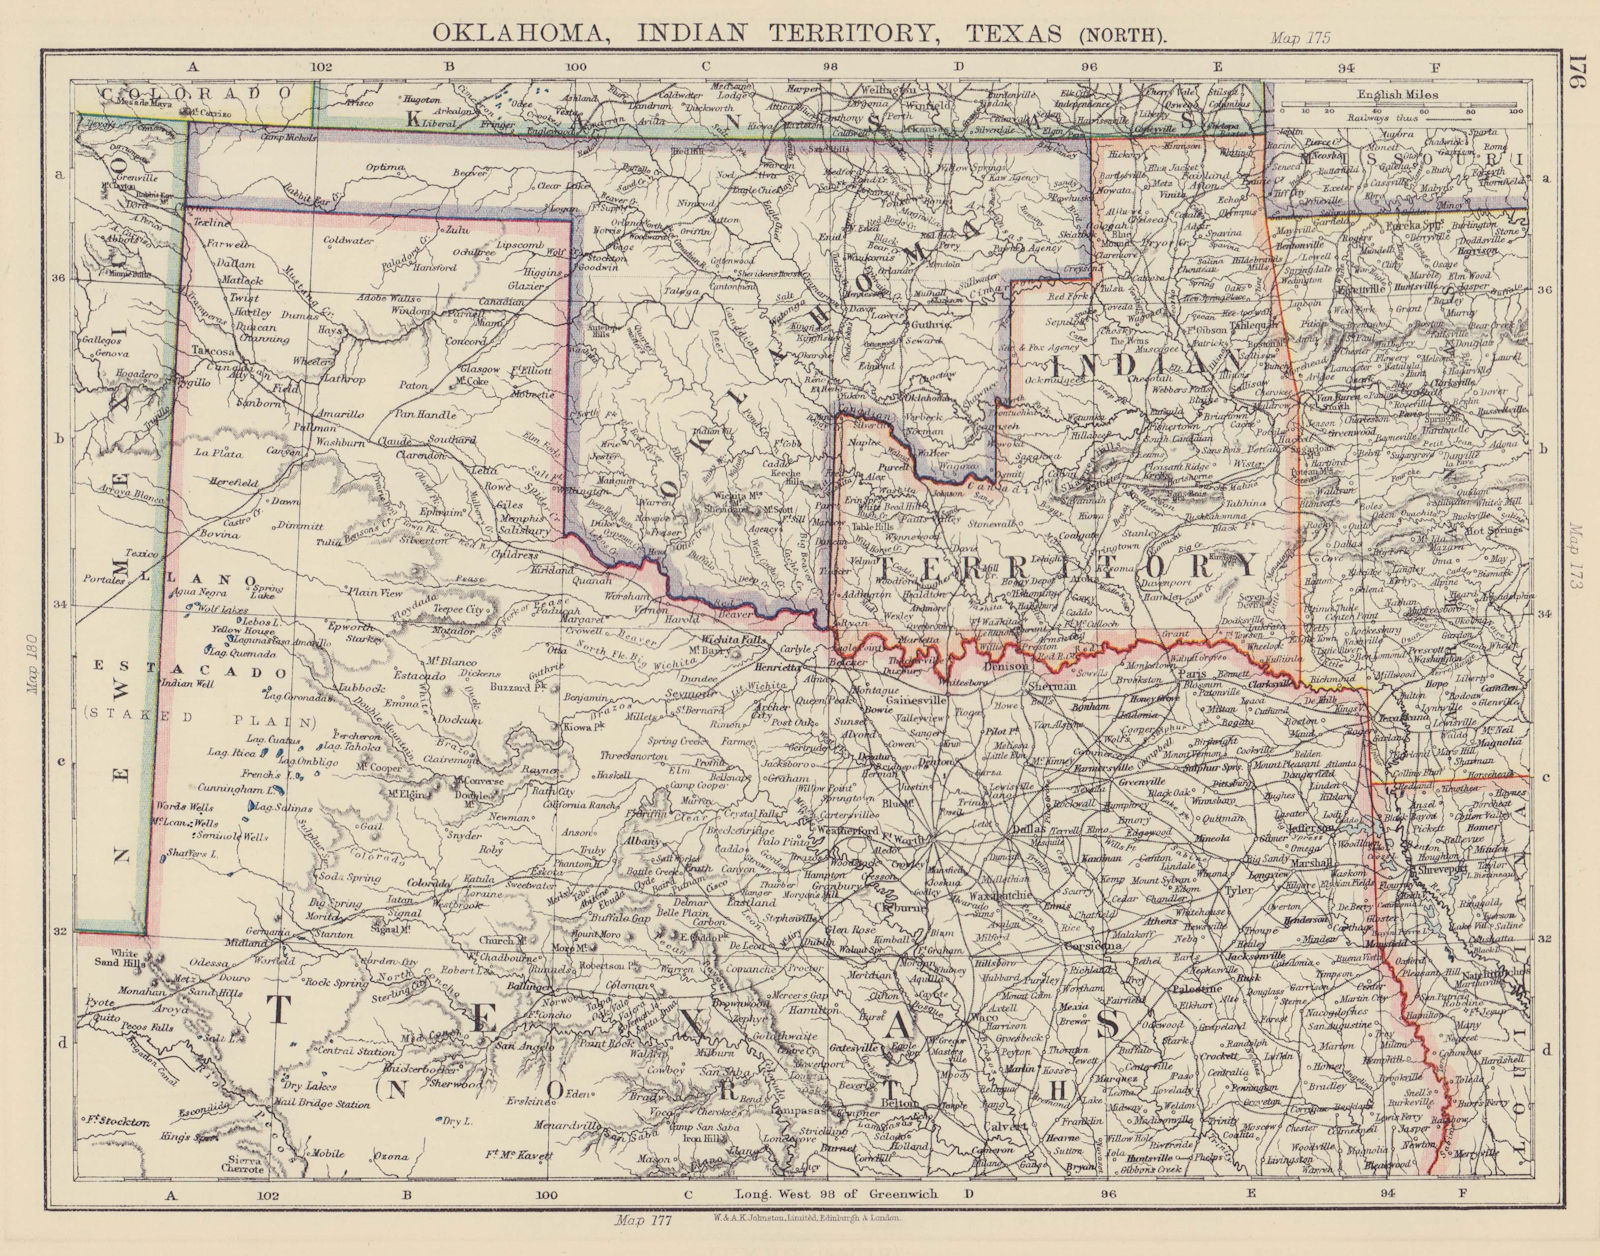 SOUTH CENTRAL USA. Oklahoma, Indian Territory & North Texas. JOHNSTON 1901 map